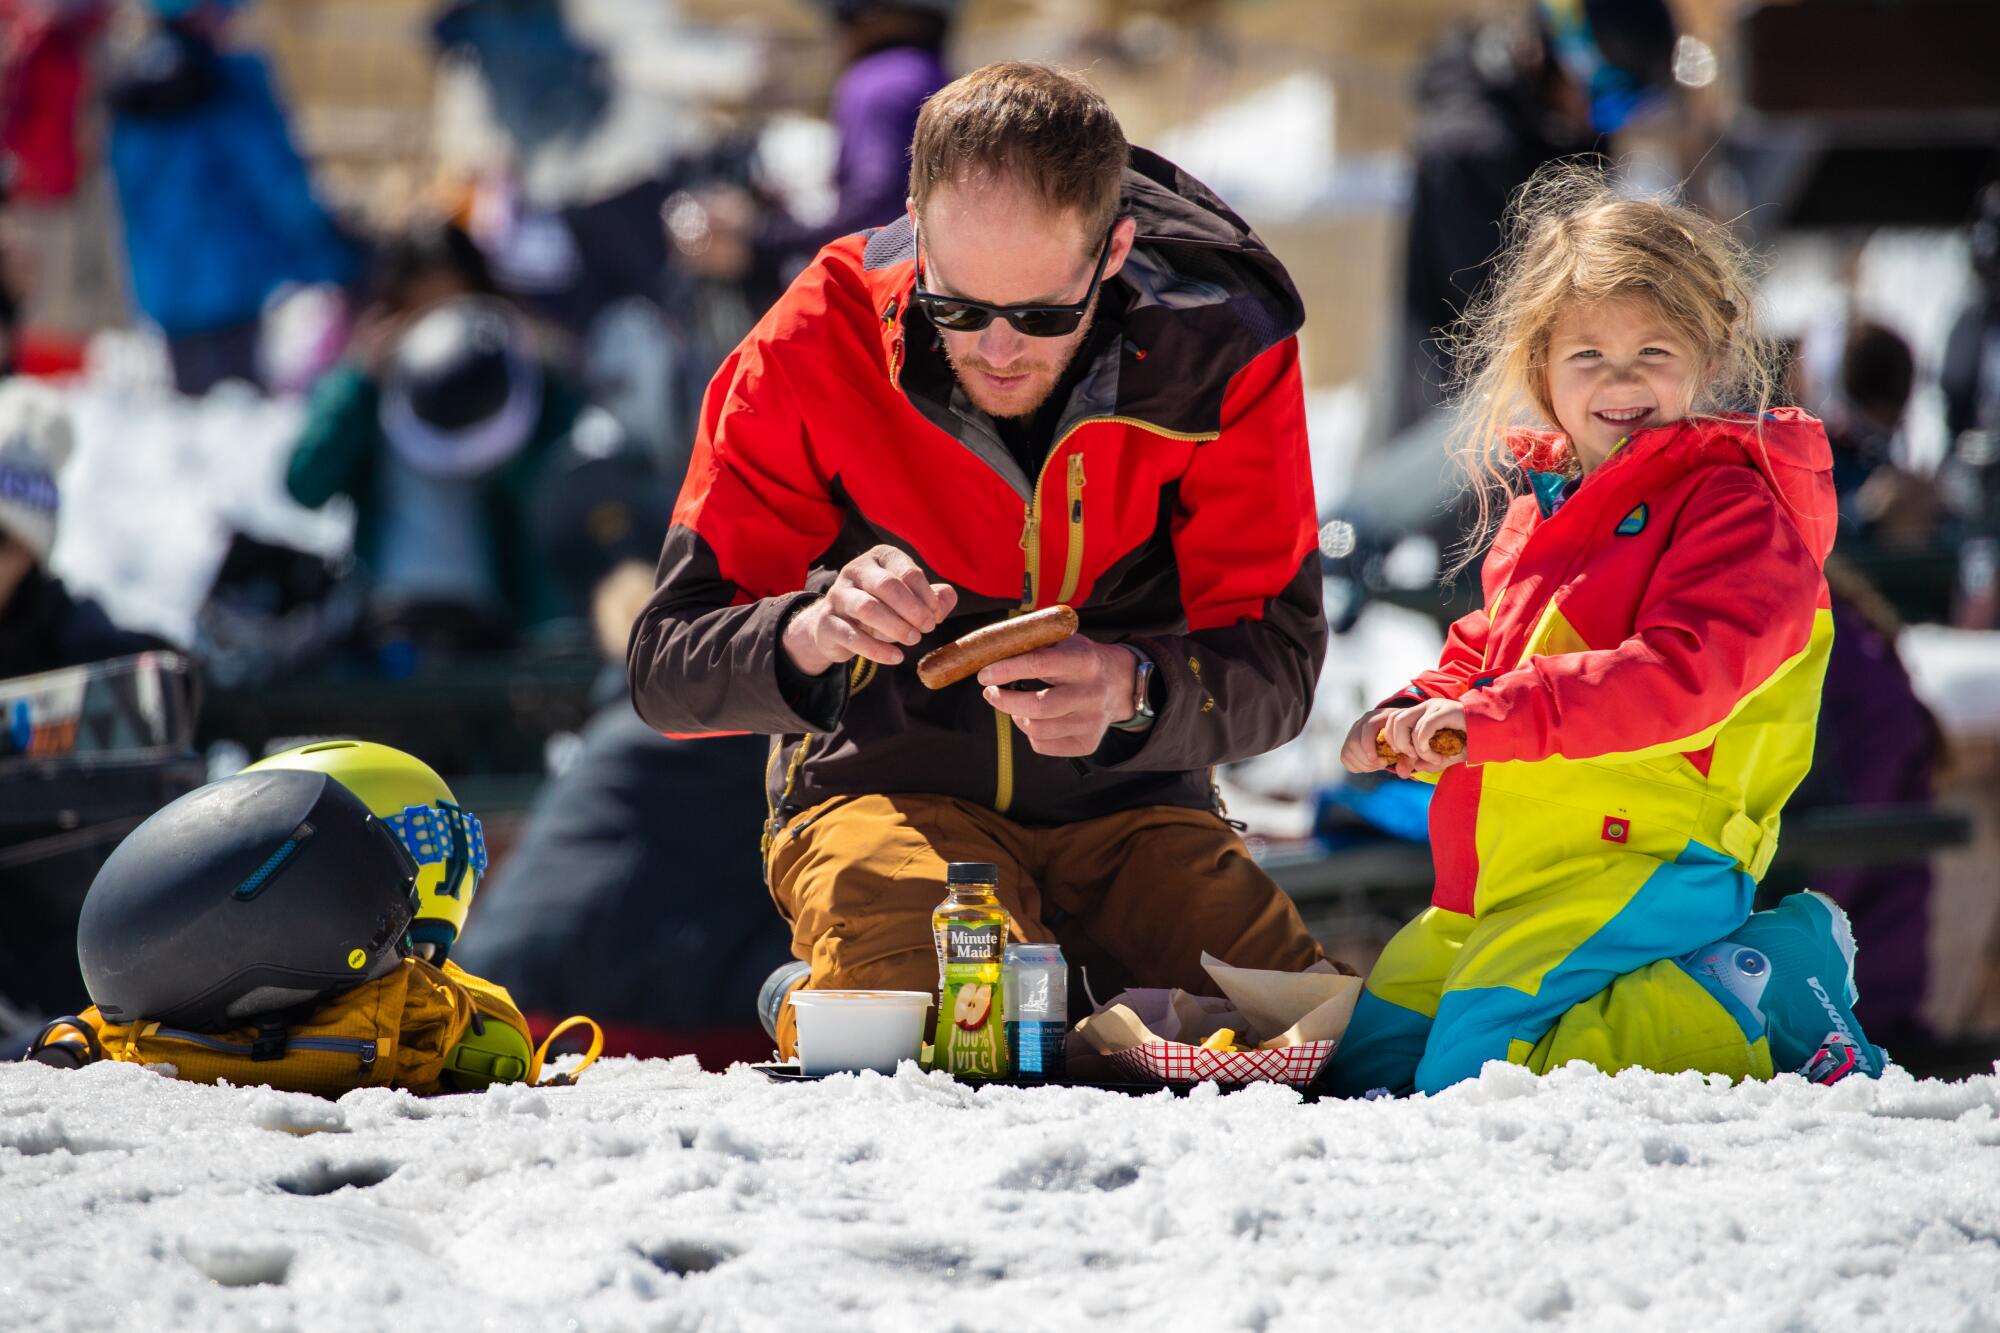 Steve Marion, with 4-year-old daughter Piper Mormon, sits down for lunch on a sunny day at Big Bear Mountain Resort.